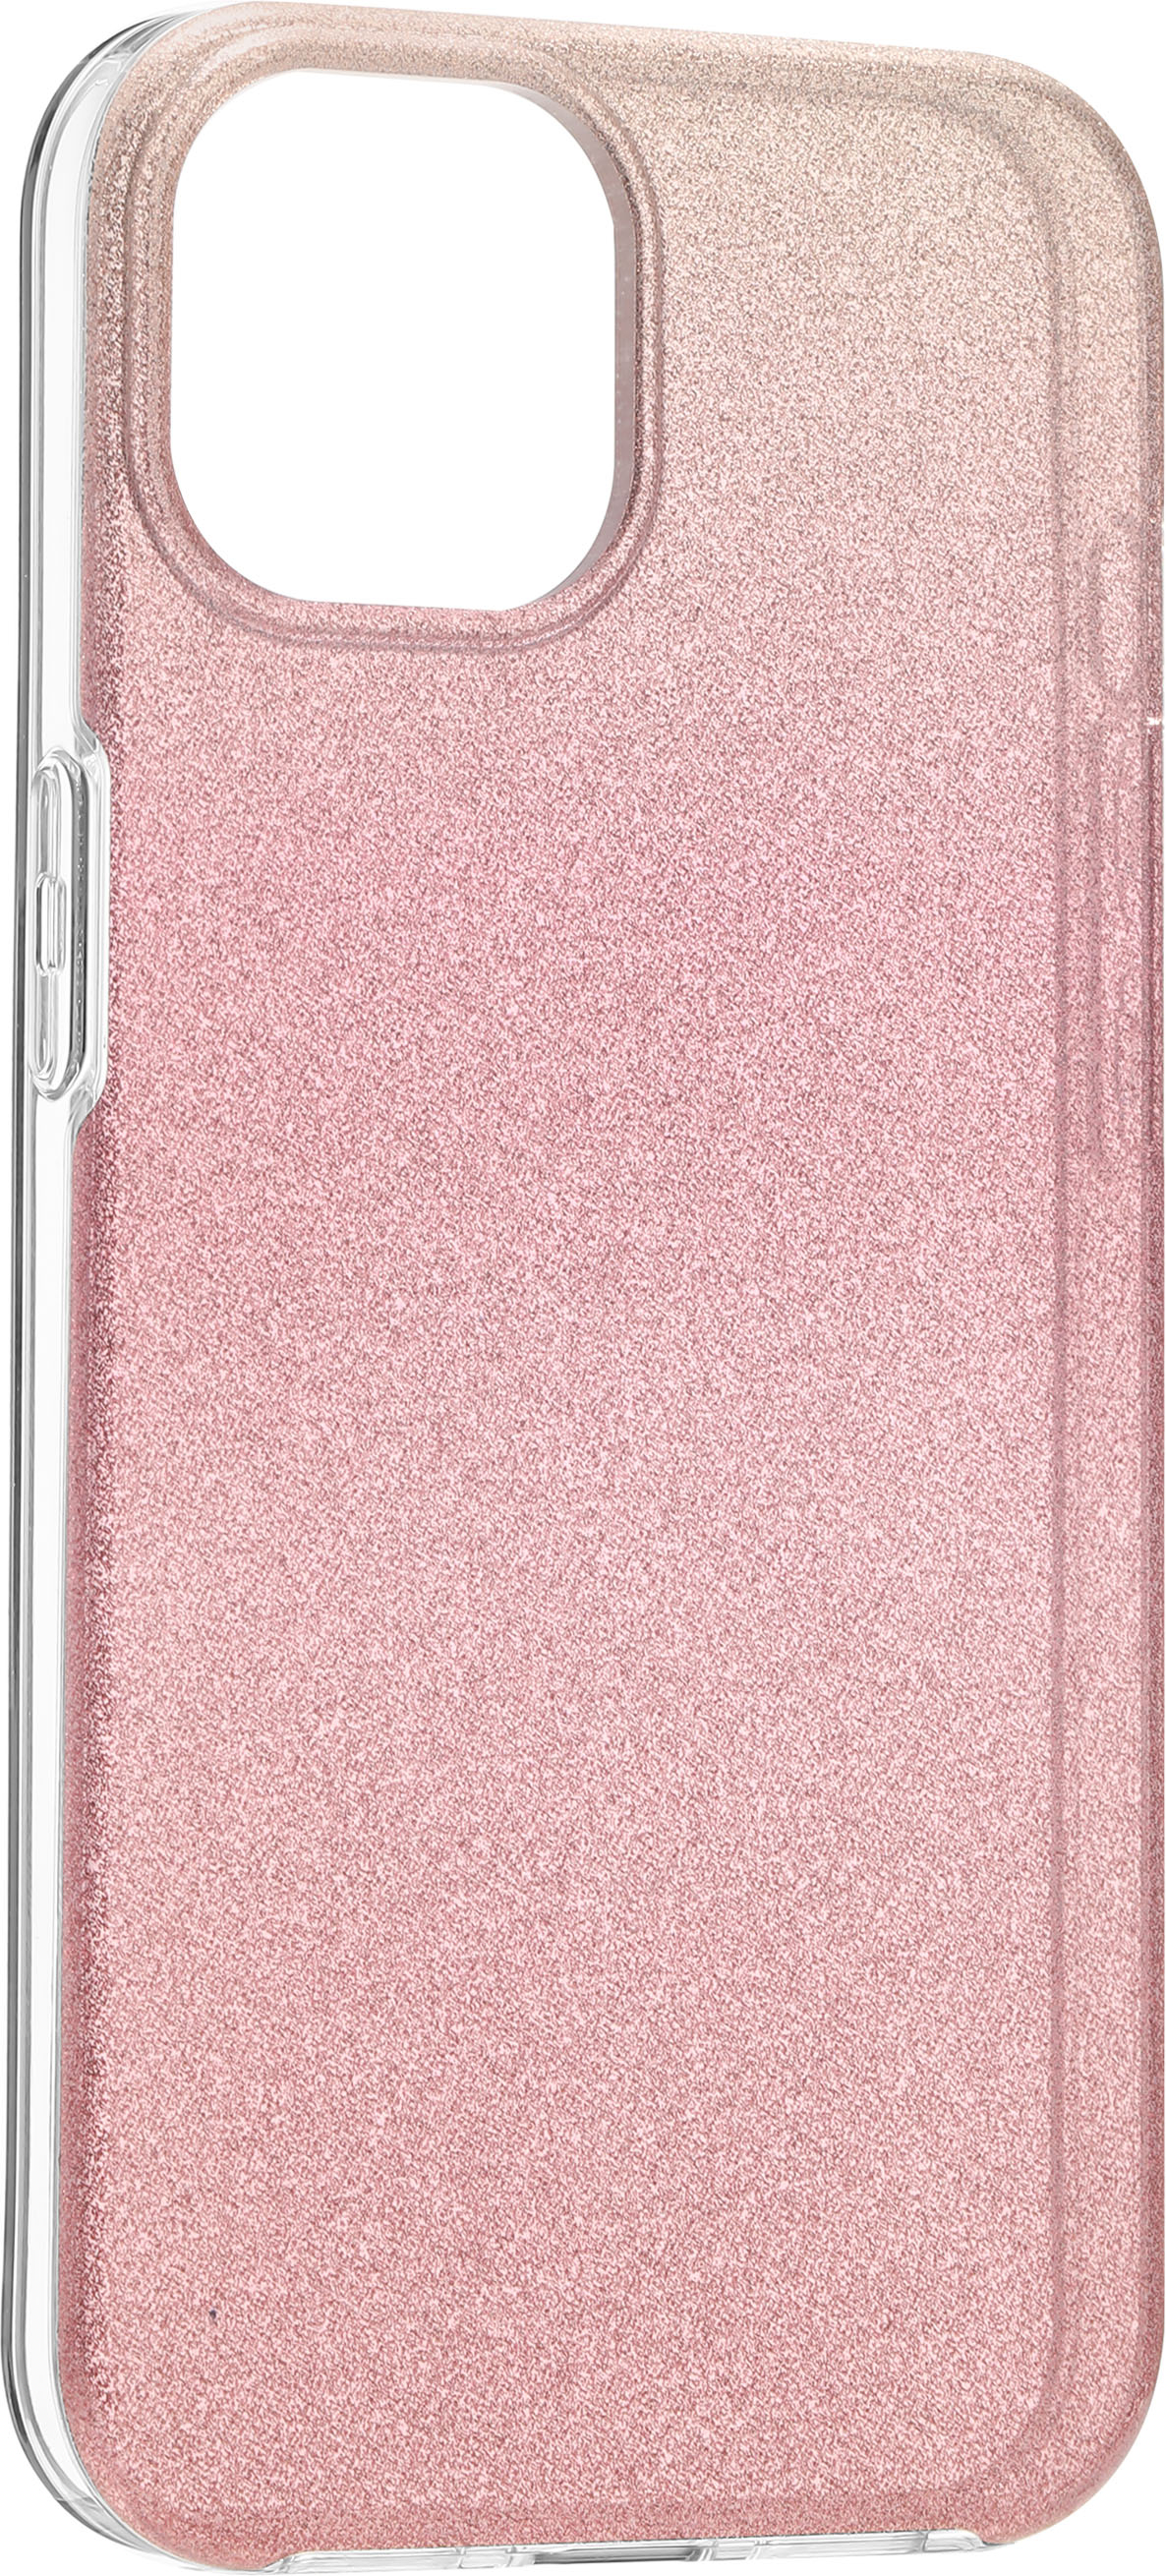 Angle View: Insignia™ - Hard Shell Case for iPhone 13 - Gradient Rose Gold Glitter